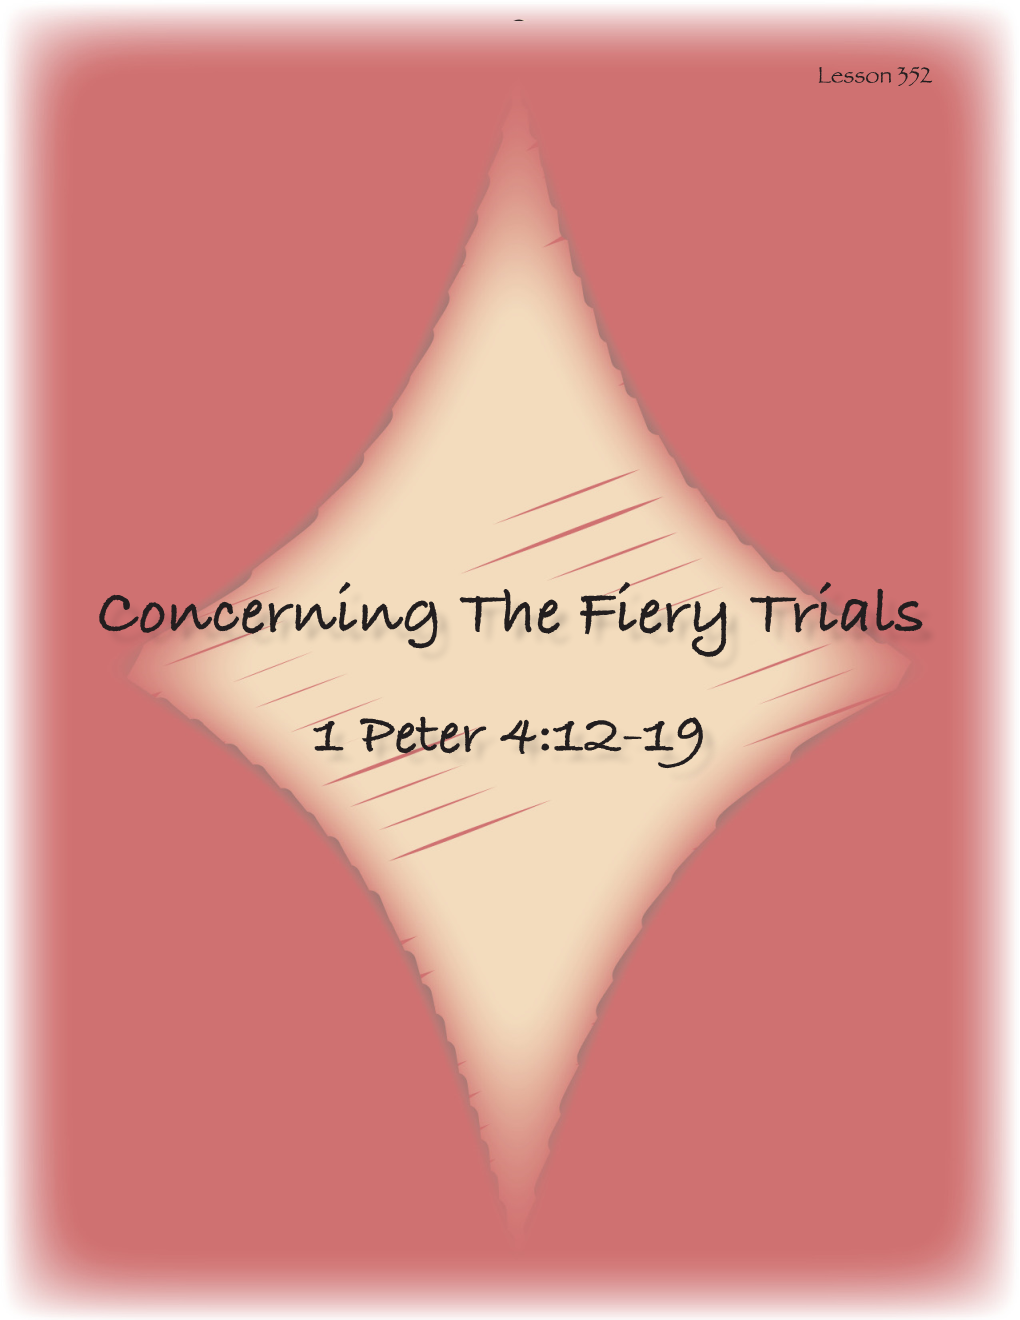 Concerning the Fiery Trials